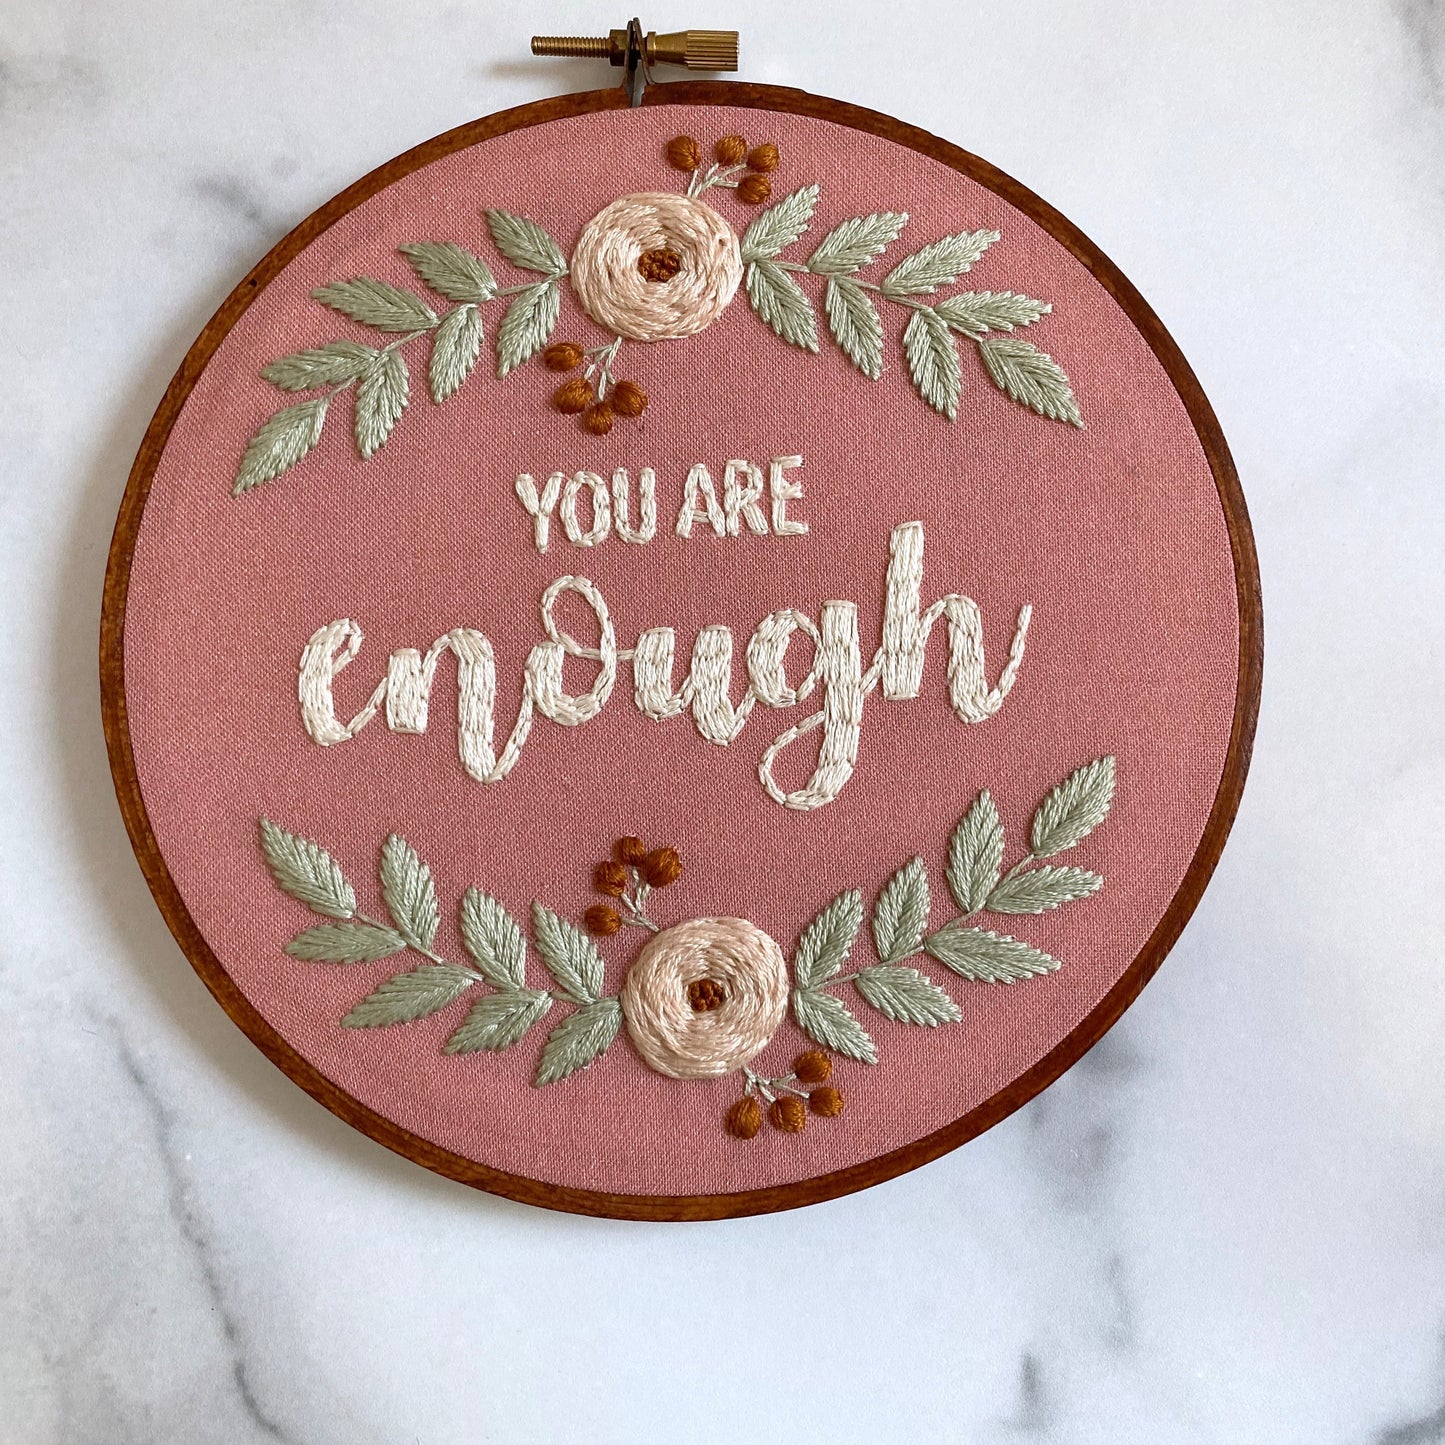 Hand Embroidery Kit - "You Are Enough"